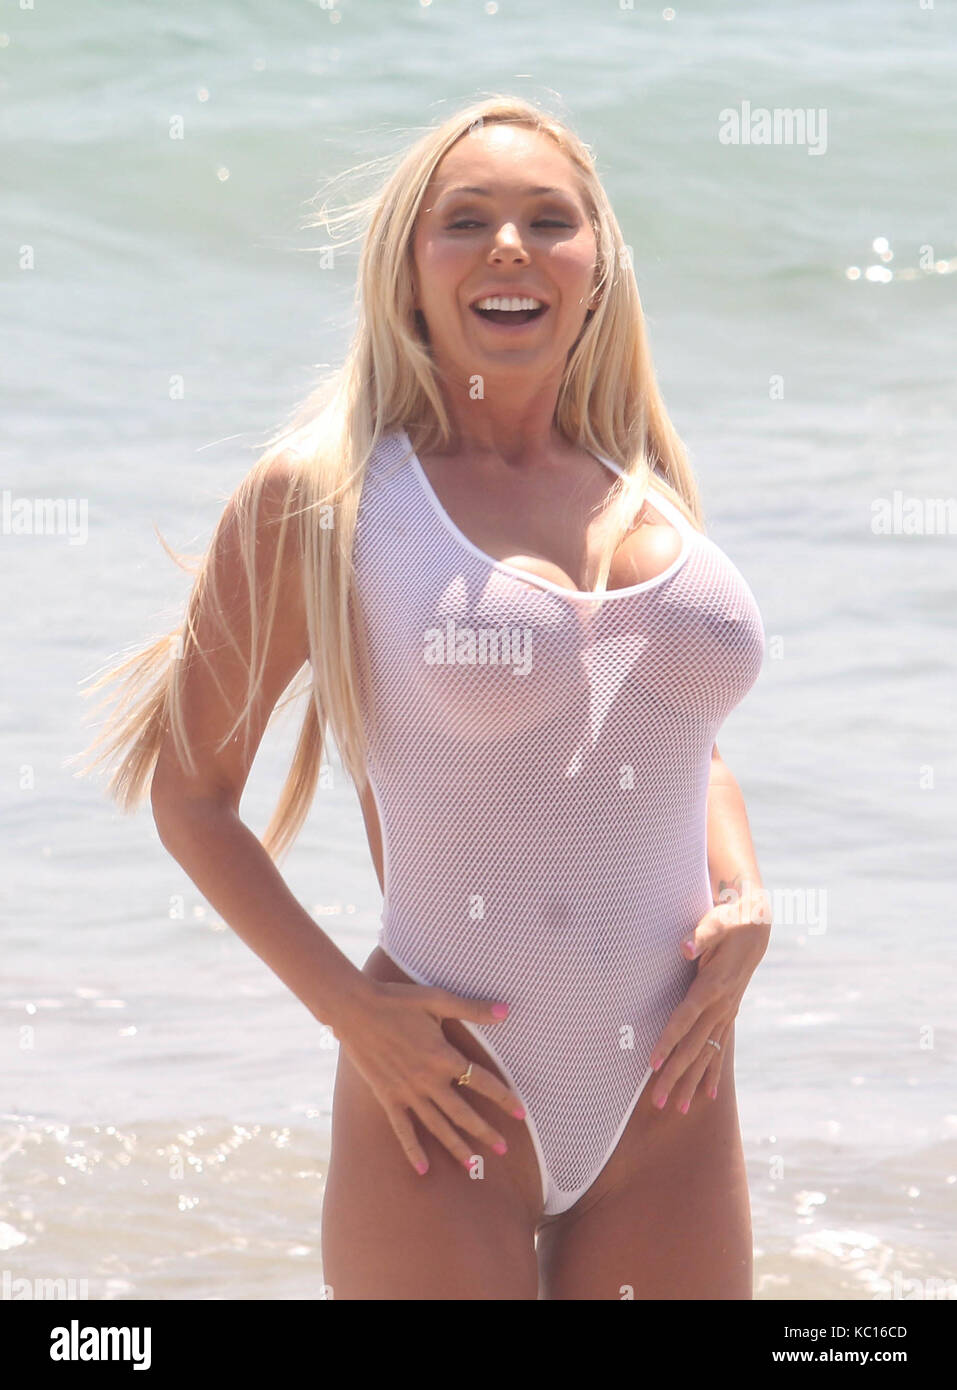 Celebrity Rehab' star Marey Carey poses on the beach in a see through  swimsuit Featuring: Mary Carey Where: Malibu, California, United States  When: 31 Aug 2017 Credit: WENN.com Stock Photo - Alamy